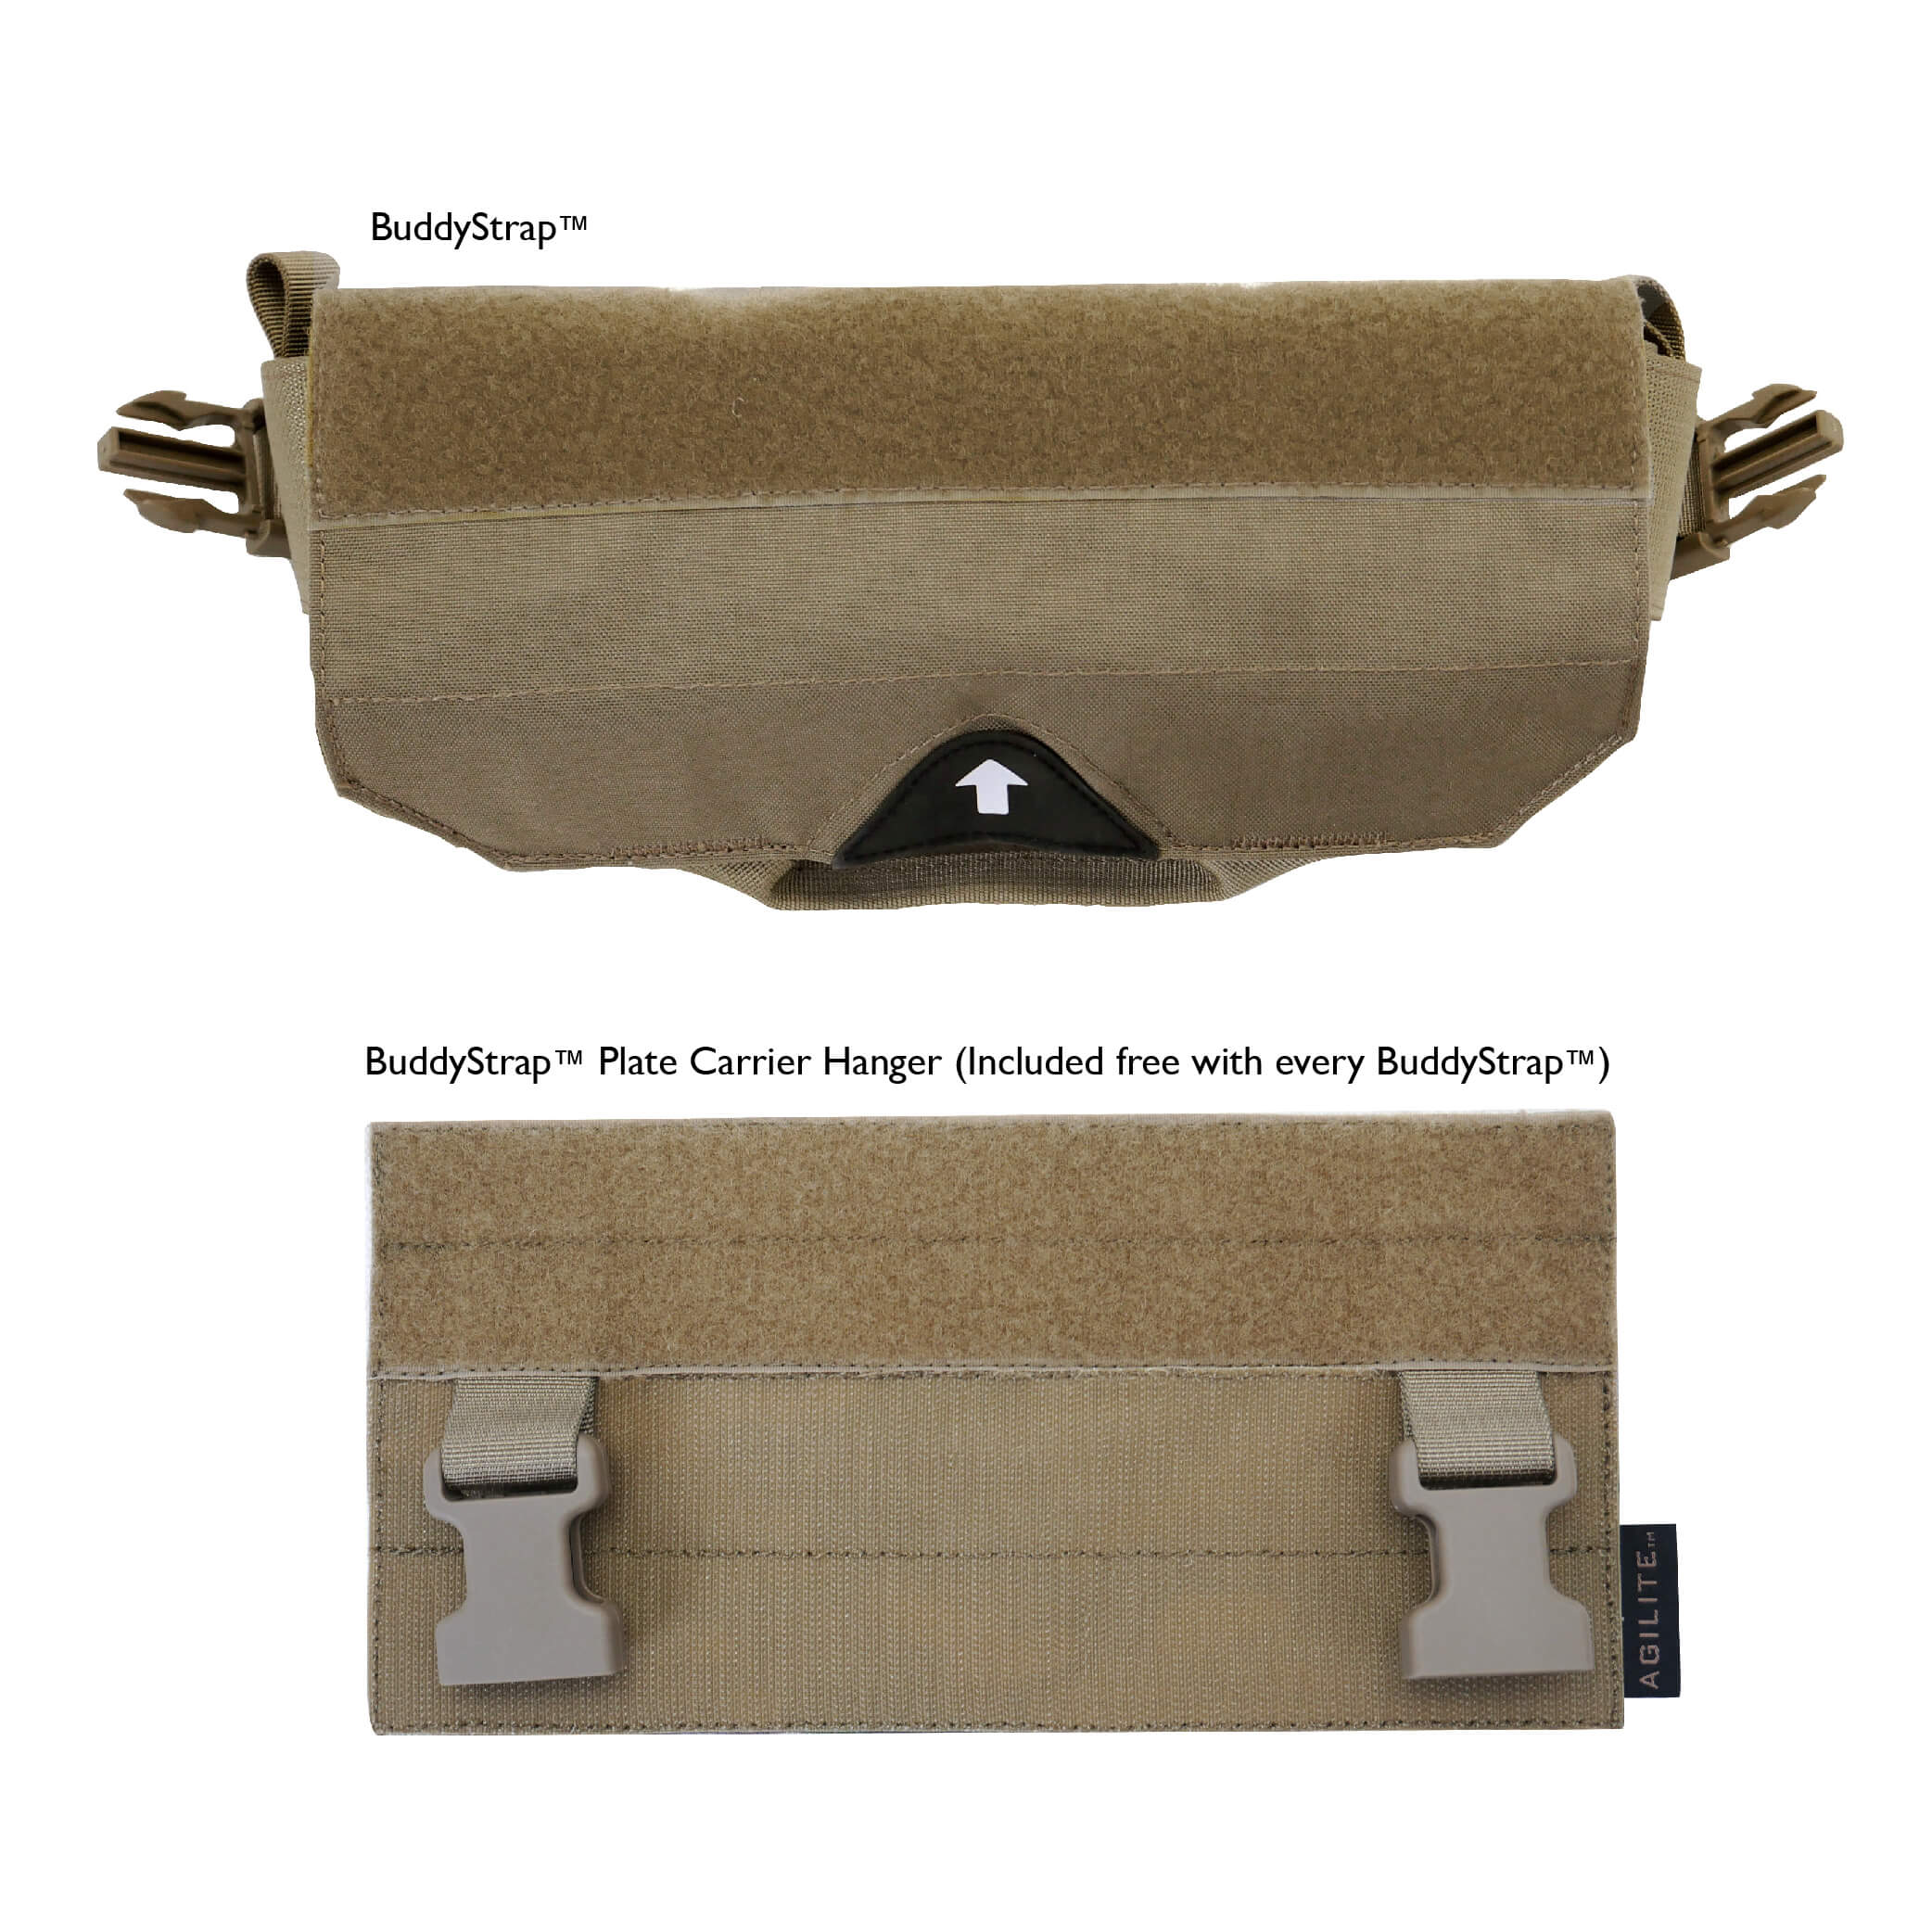 BuddyStrap™ Injured Person Carrier (7859300761852) (8018935152925)